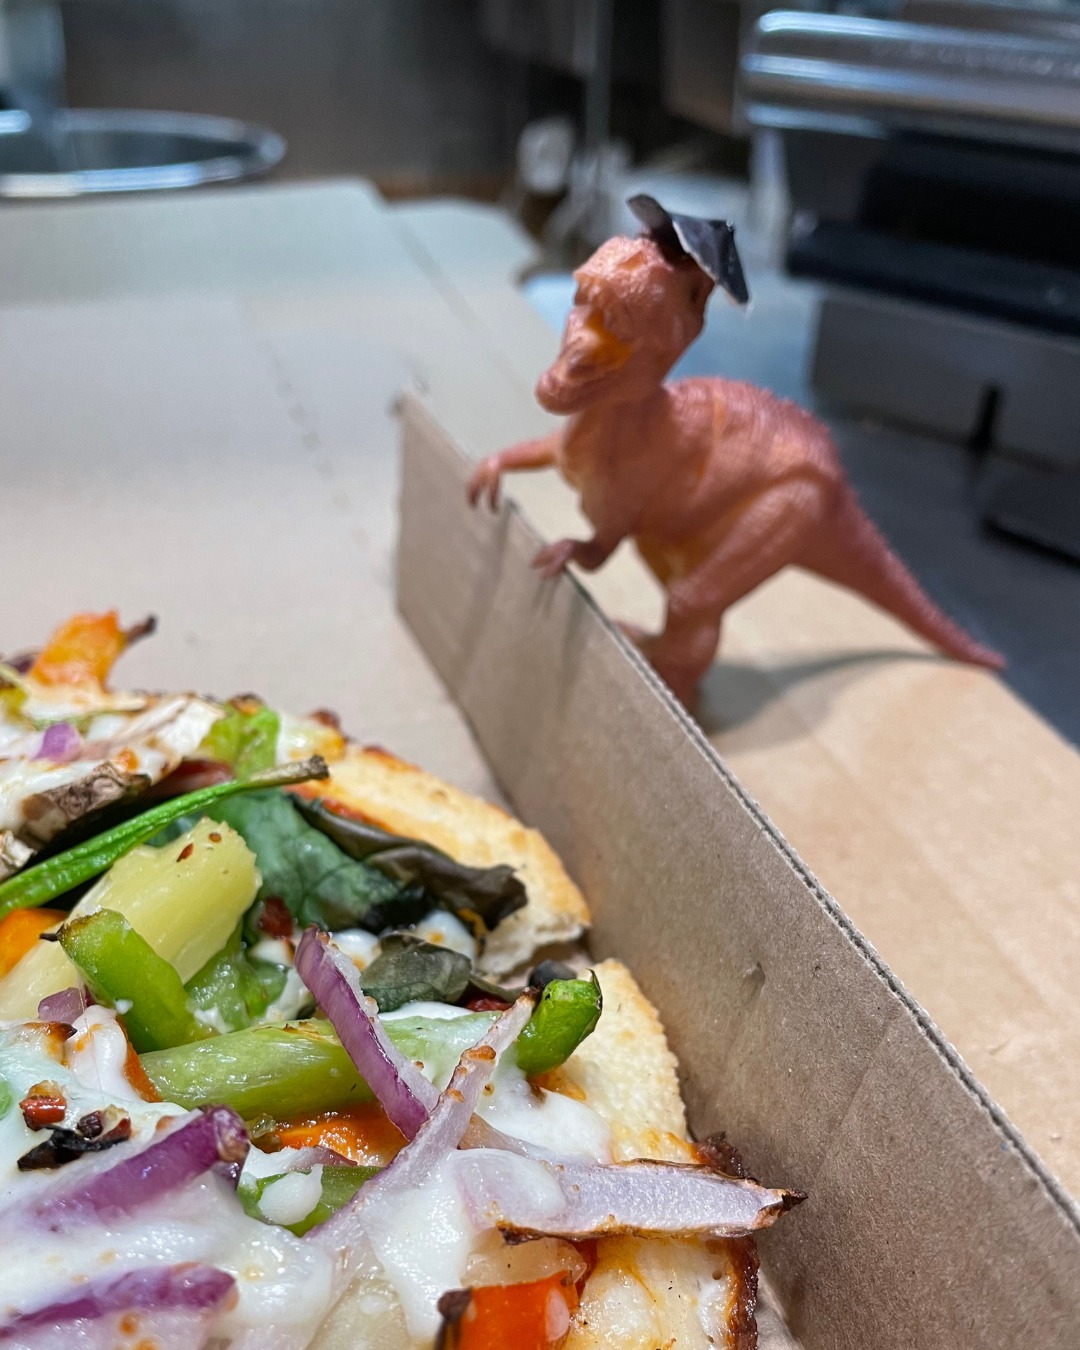 Bitey the dinosaur toy posing with a freshly made Domino's pizza.